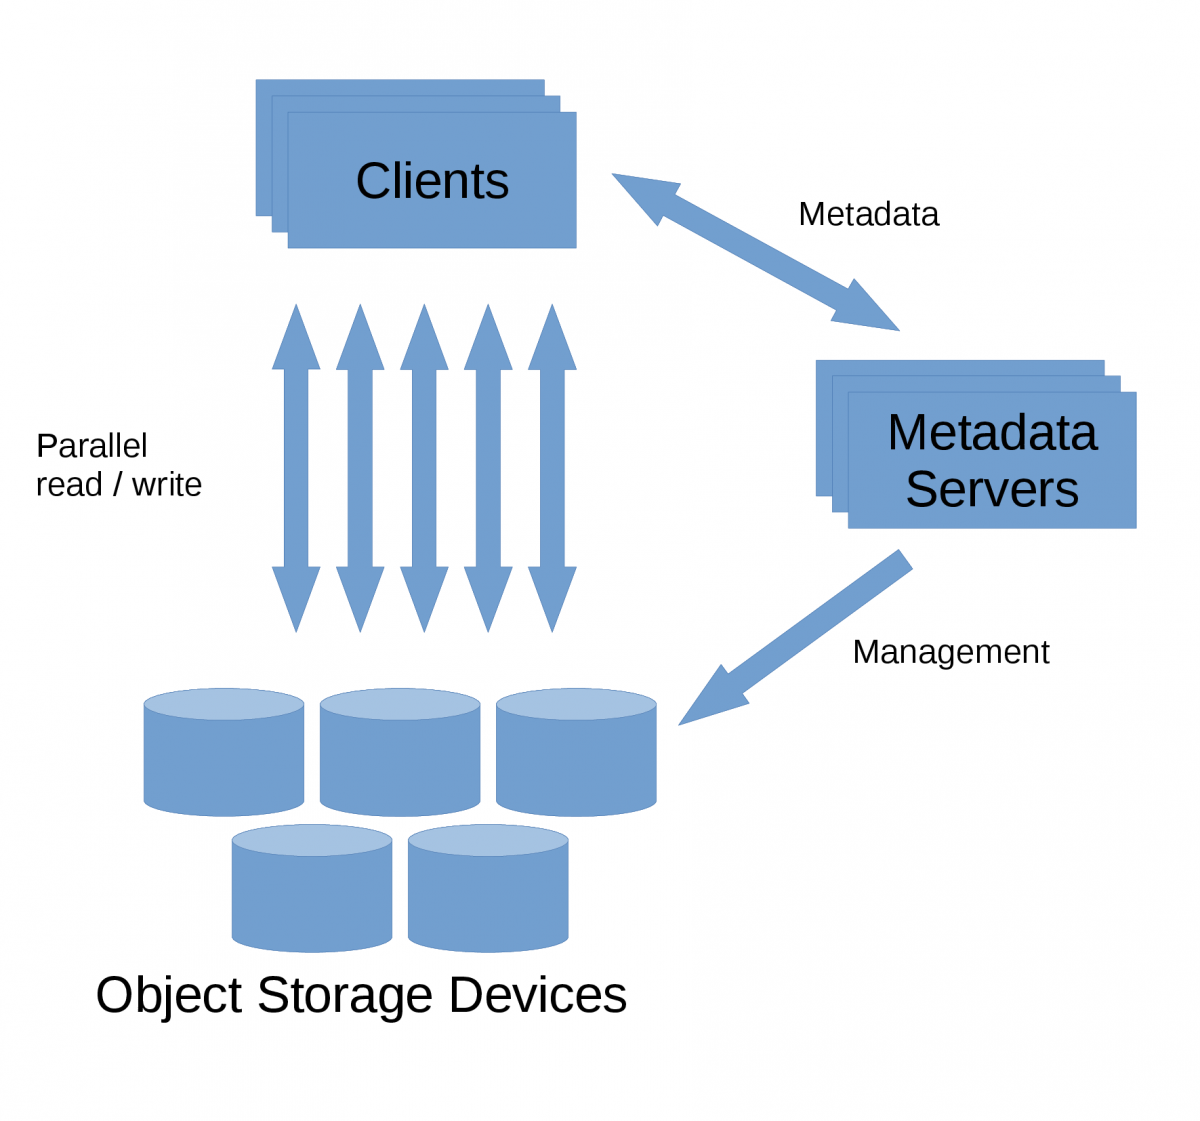 Object-based file system architecture with Object Storage Devices,   Metadata Servers and Clients.